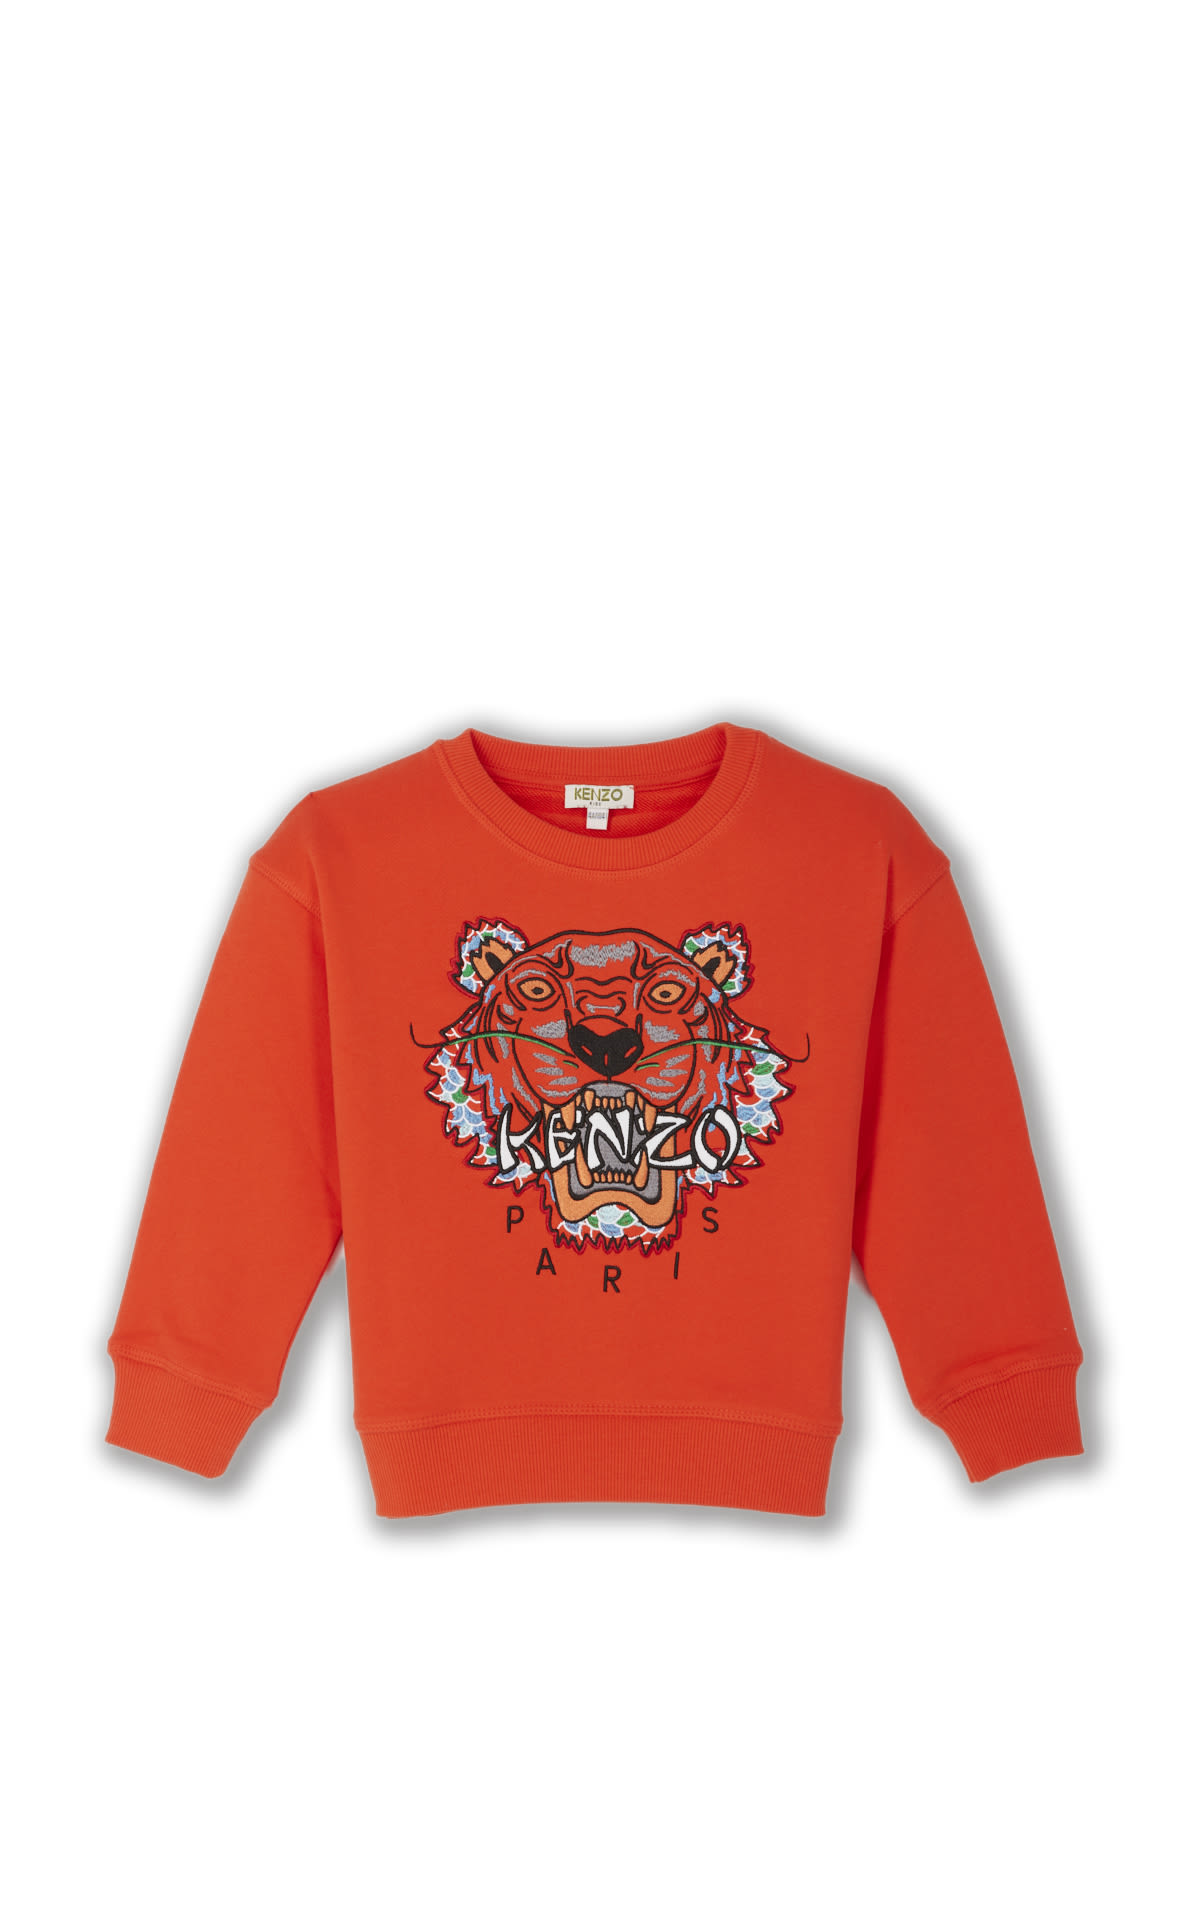 KENZO red embroidered tiger sweater